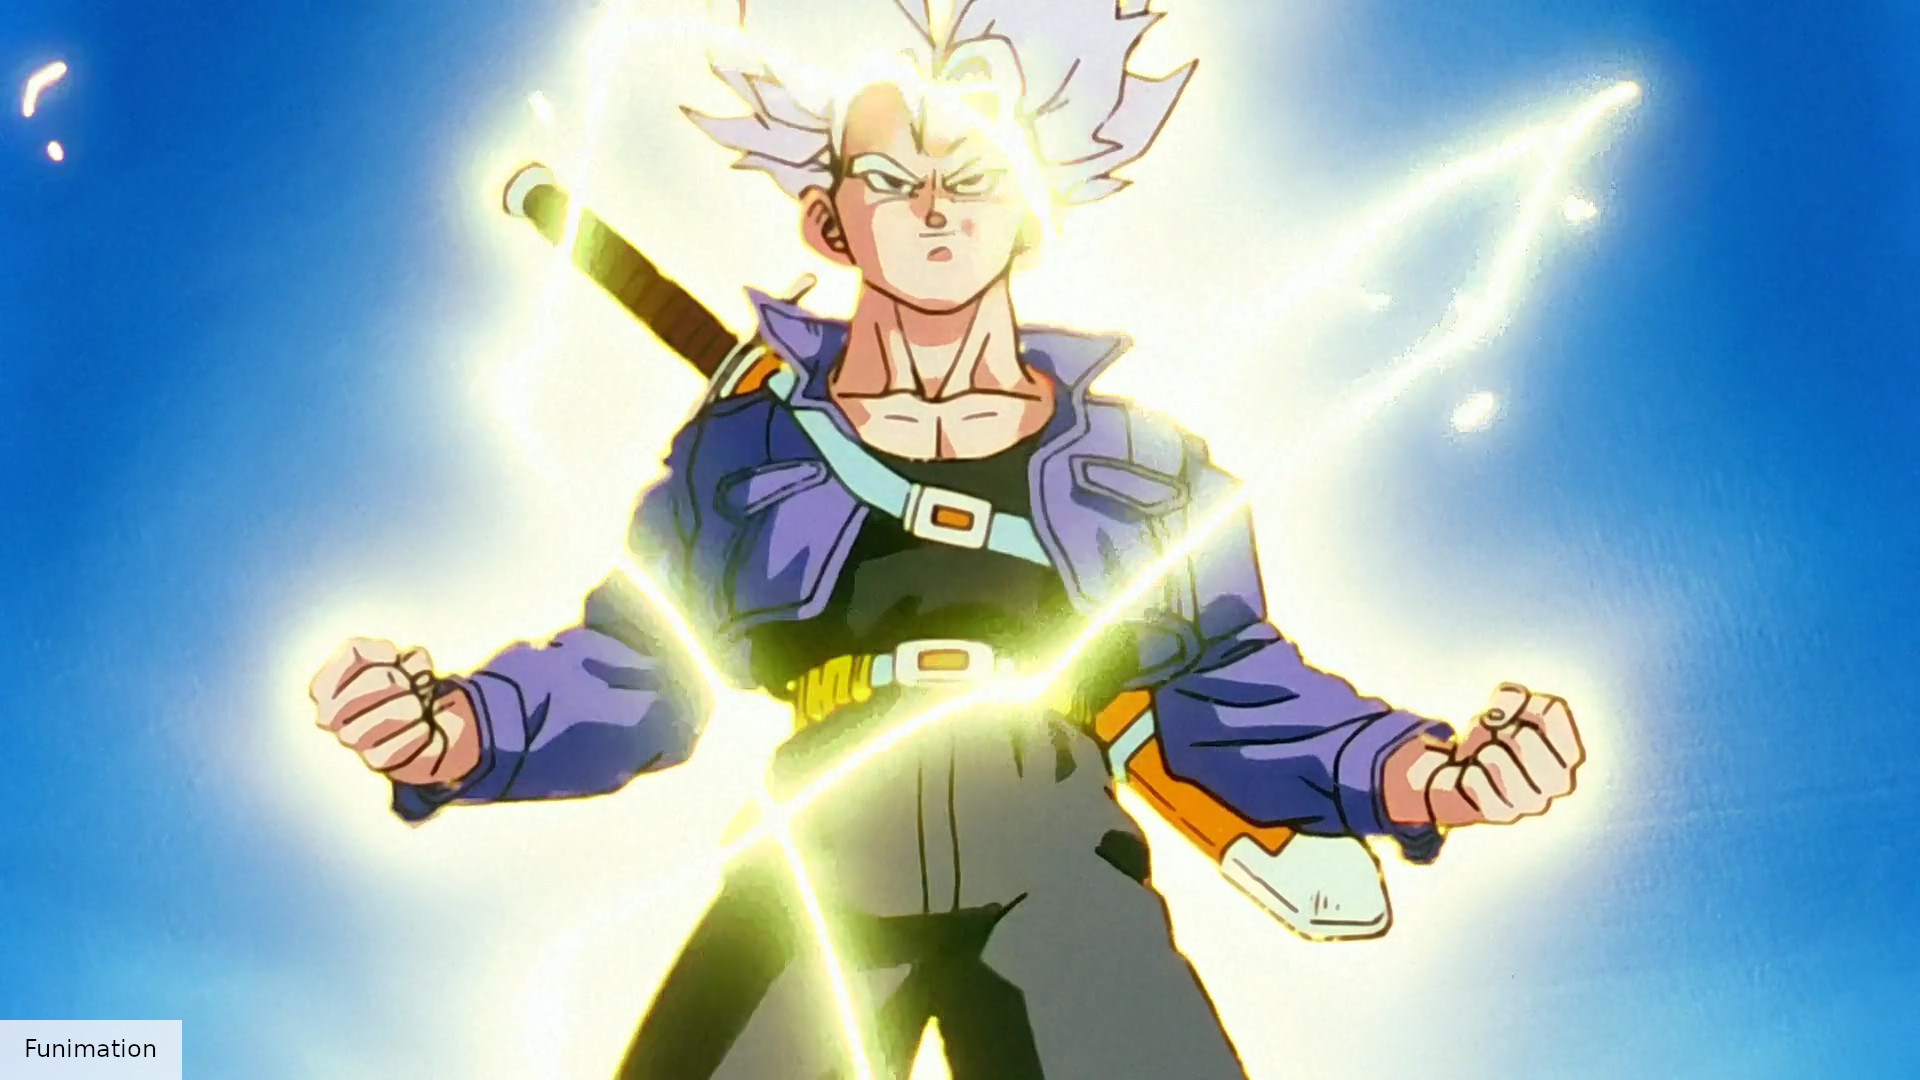 The 11 best Dragon Ball Z characters